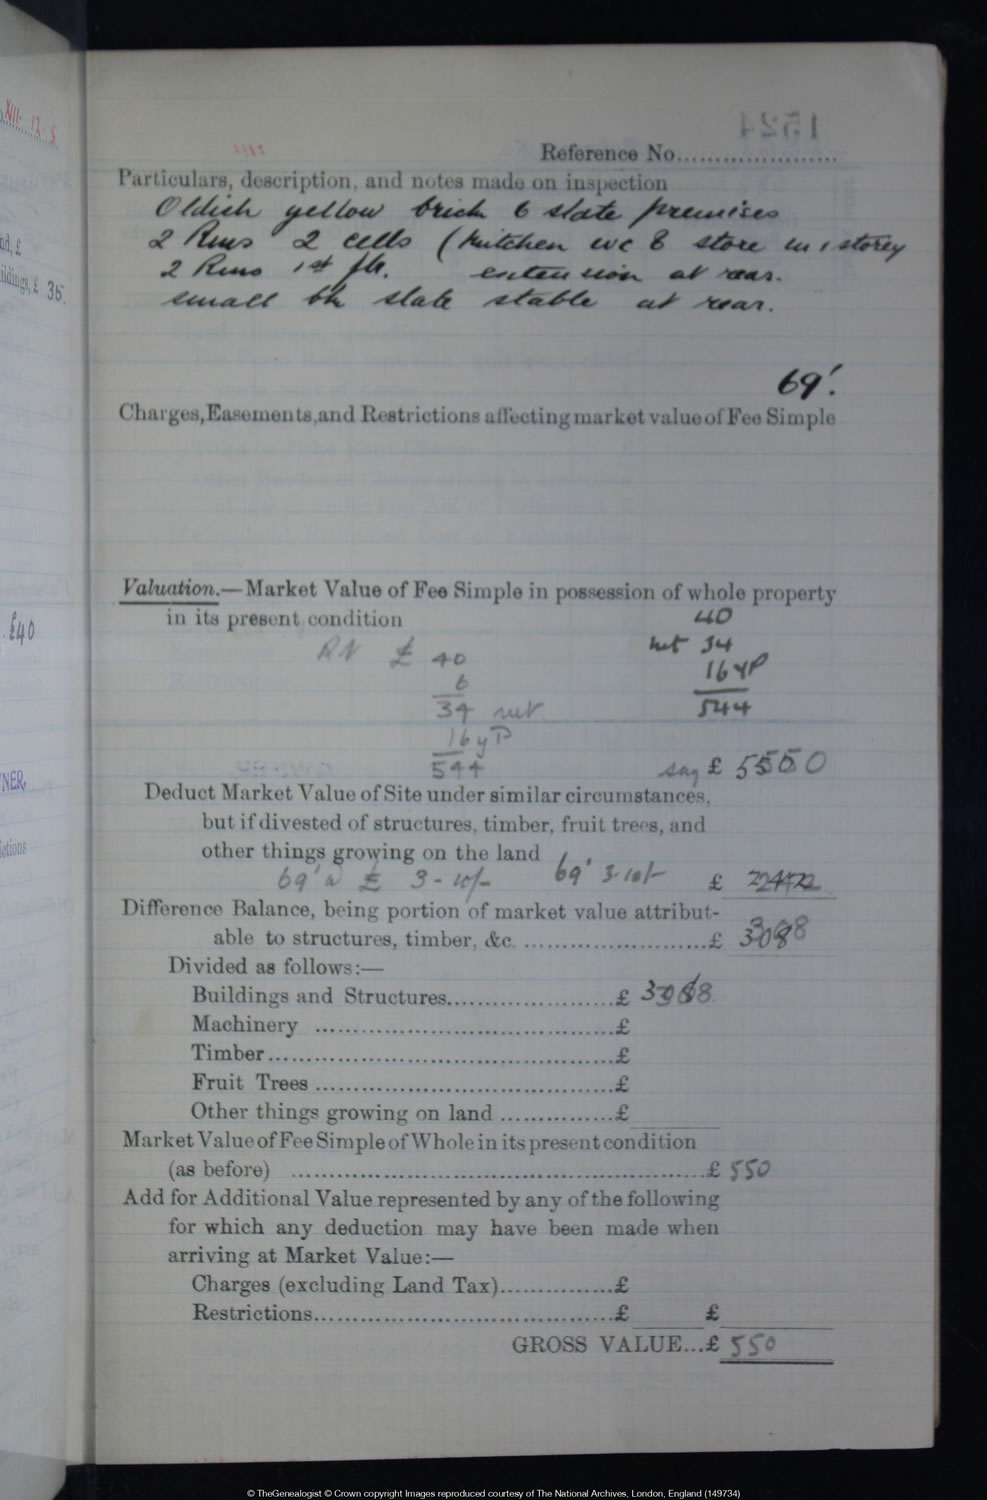 IR58 Field Book for the Pound Street Police Station, an "Oldish yellow brick & slate premises 2 Rms 2 cells"